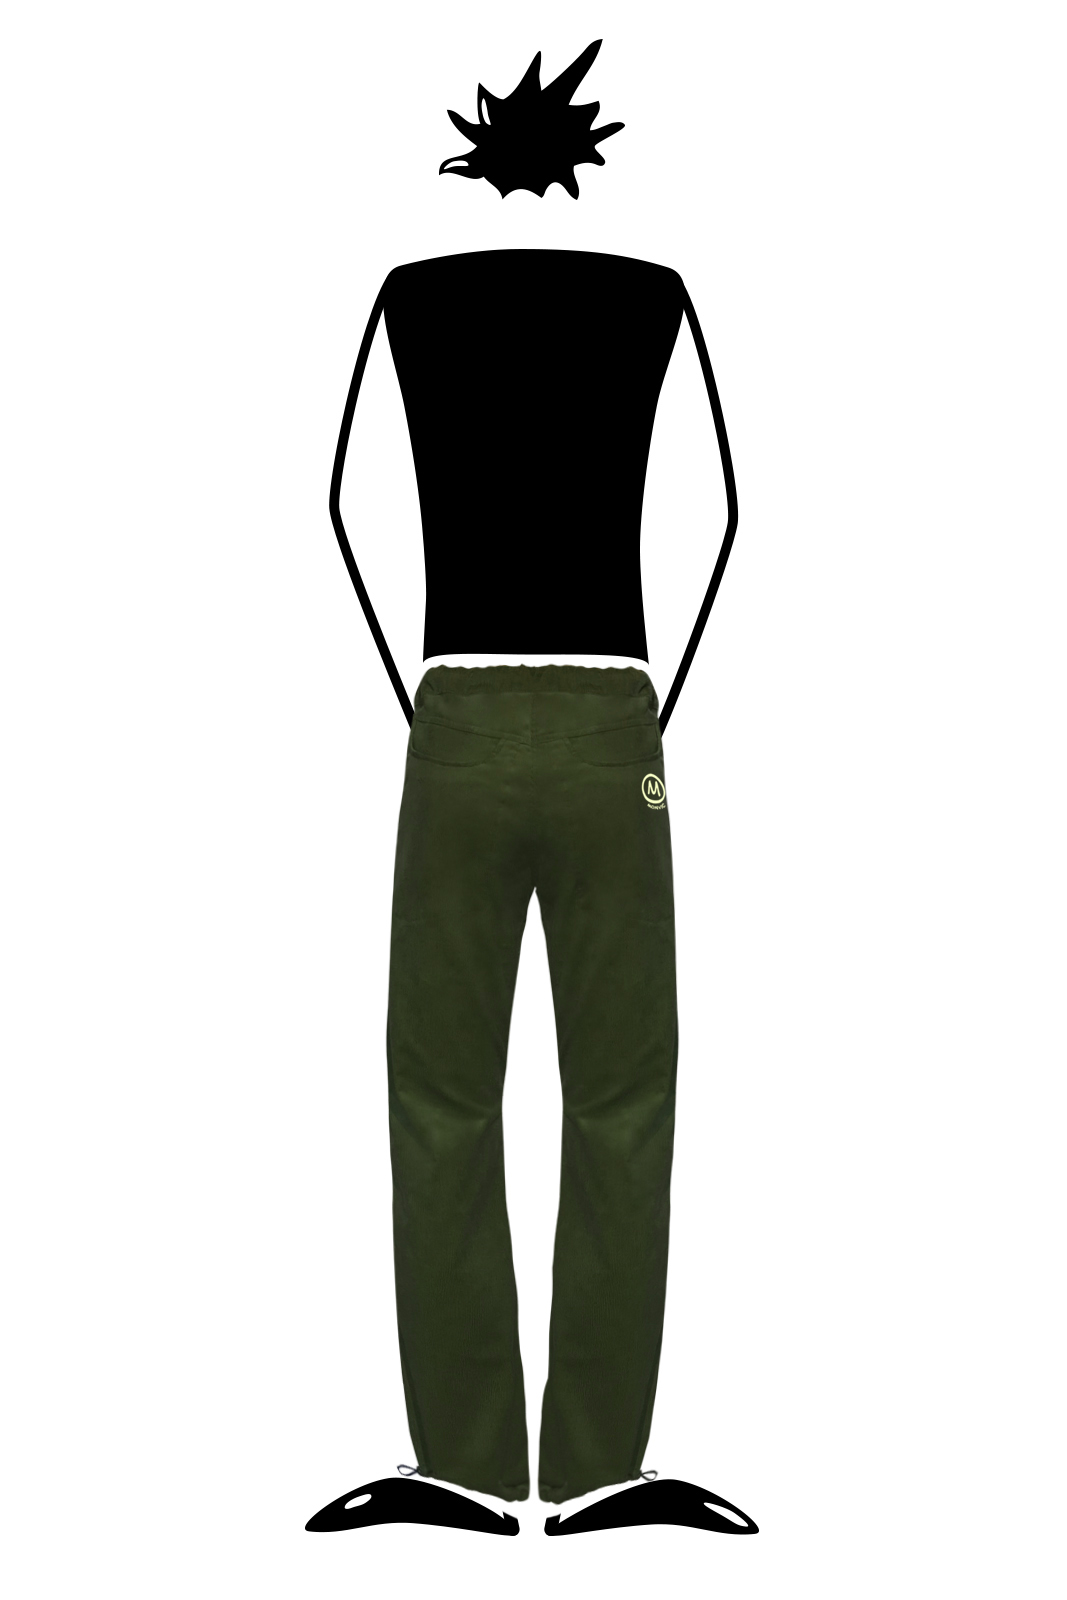 Men's featherwale trousers for climbing CLYDE VELVET Monvic army green